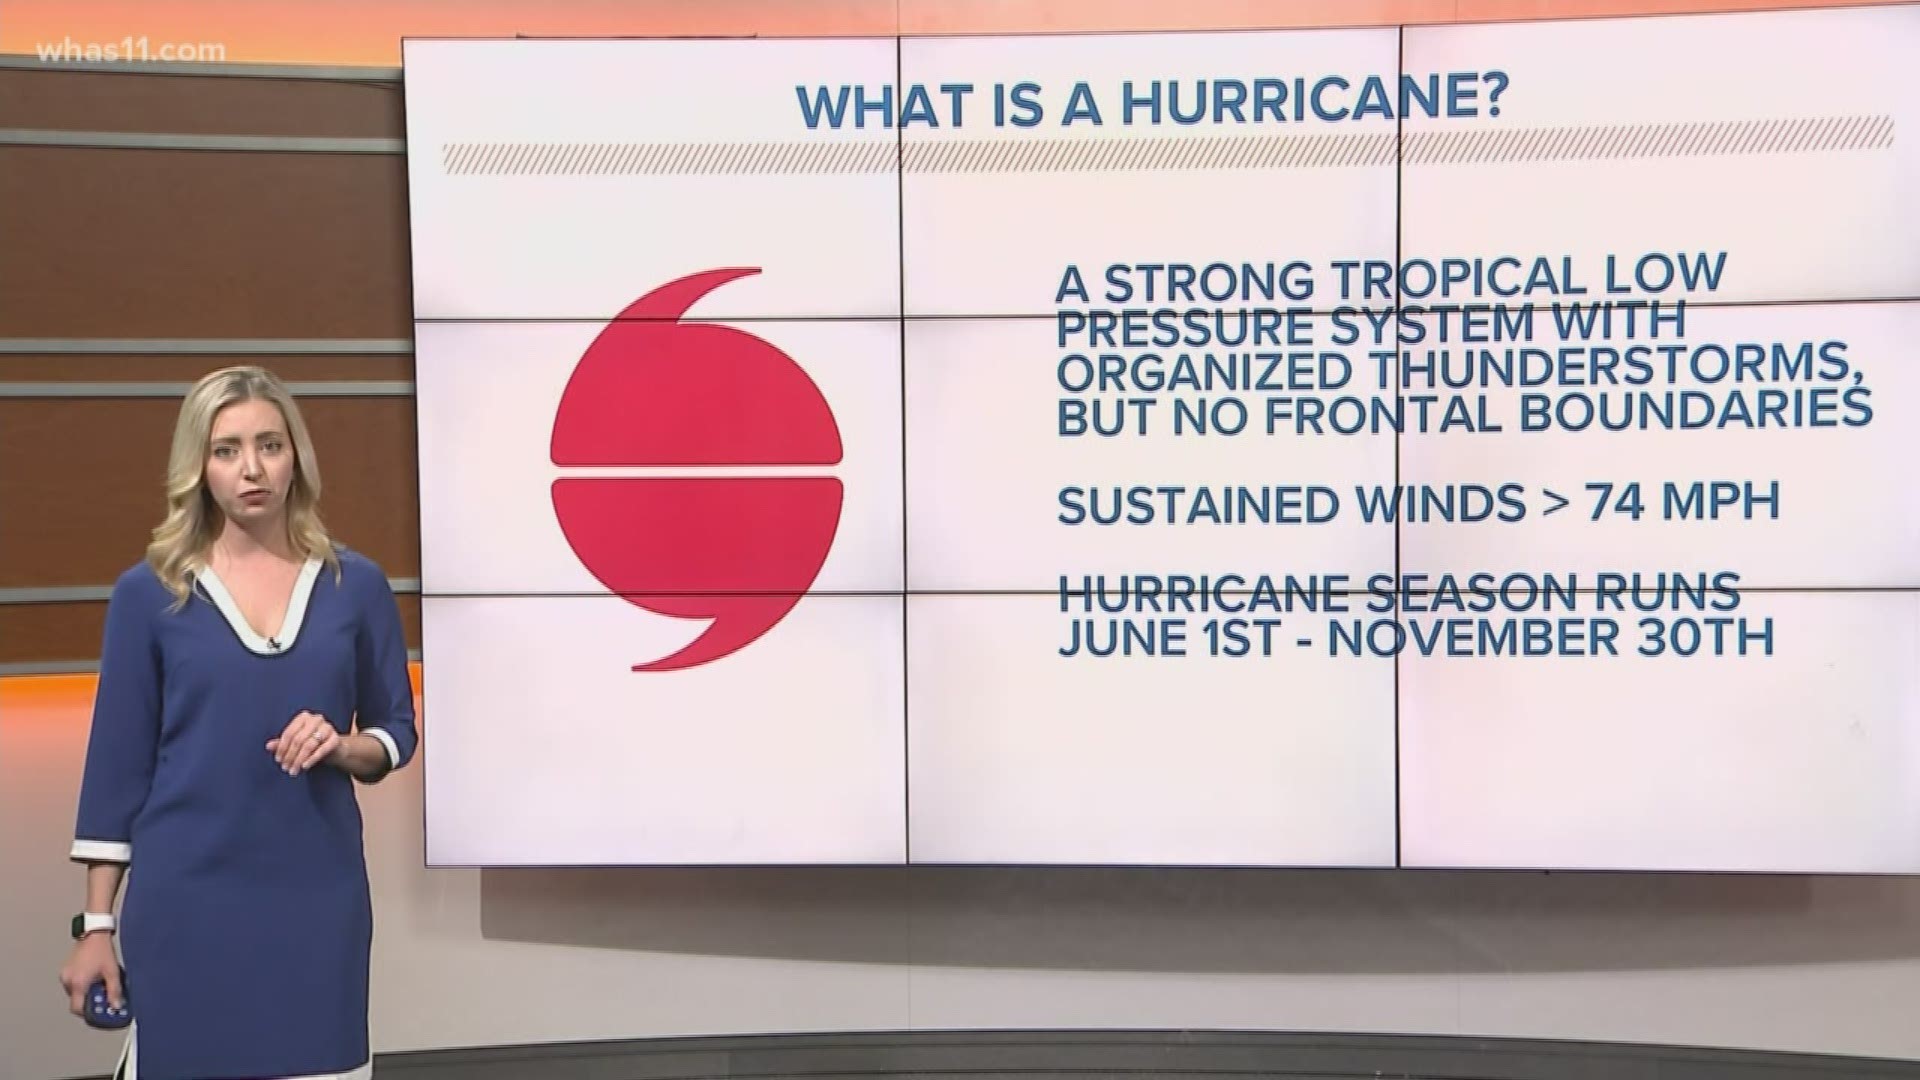 Hurricane strength is determined by maximum sustained winds within a storm and there are 5 categories.